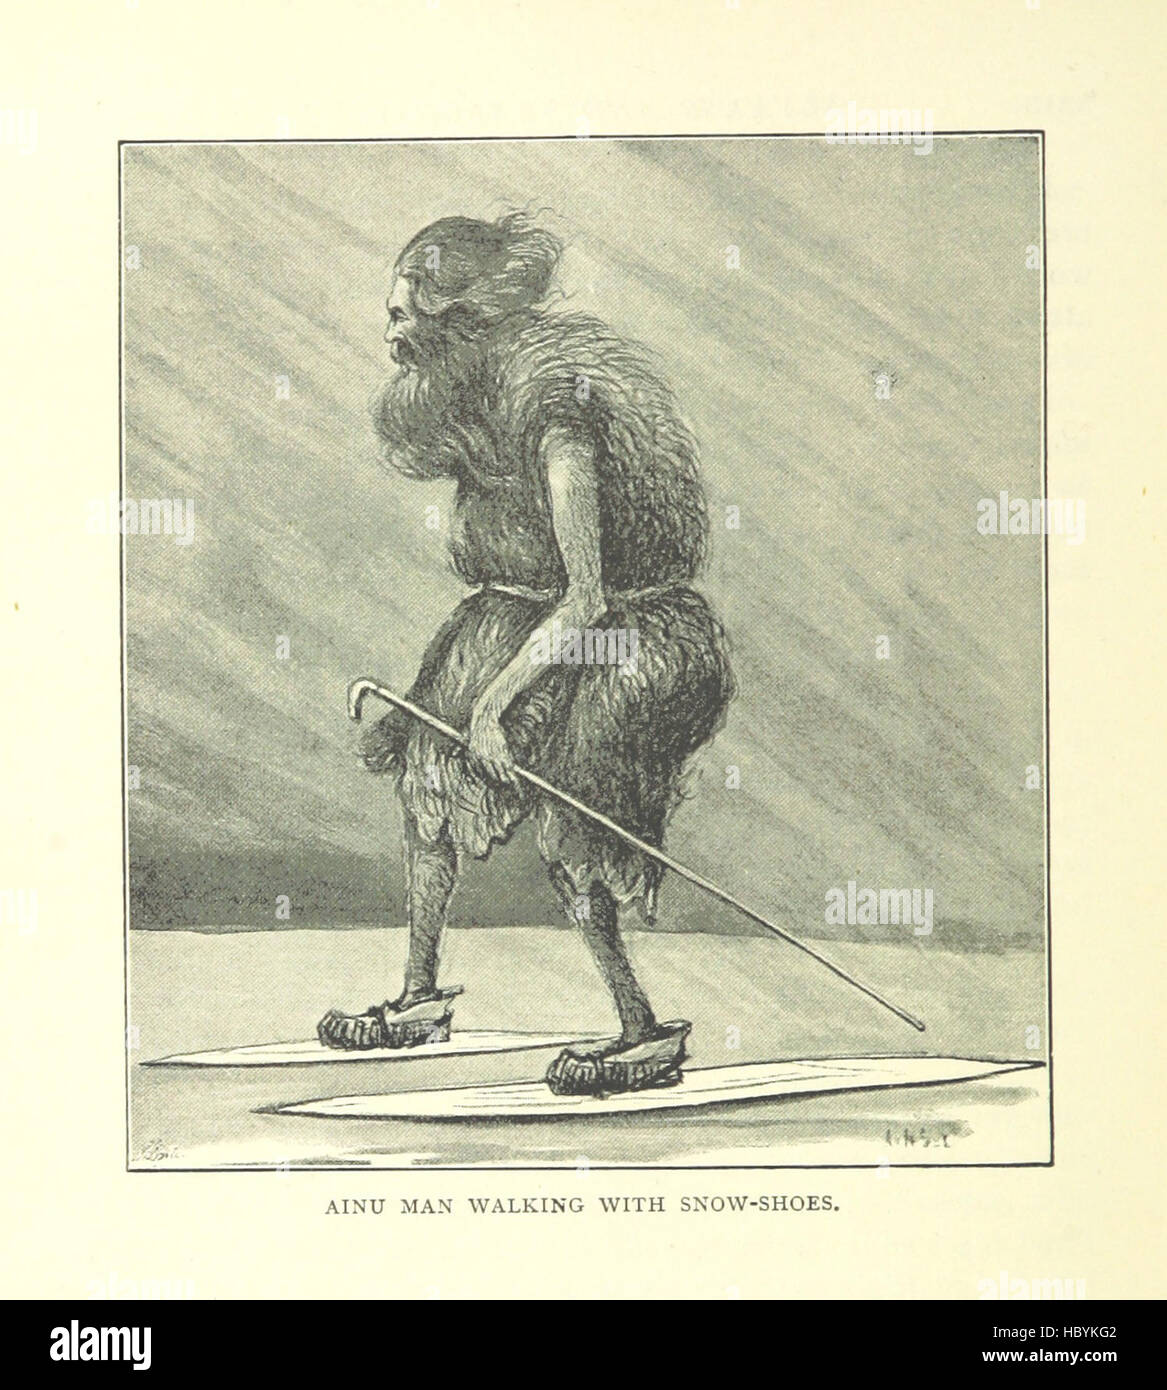 Image taken from page 260 of 'Alone with the Hairy Ainu, or, 3,800 miles on a pack saddle in Yezo and a cruise to the Kurile Islands ... With map, etc' Image taken from page 260 of 'Alone with the Hairy Stock Photo